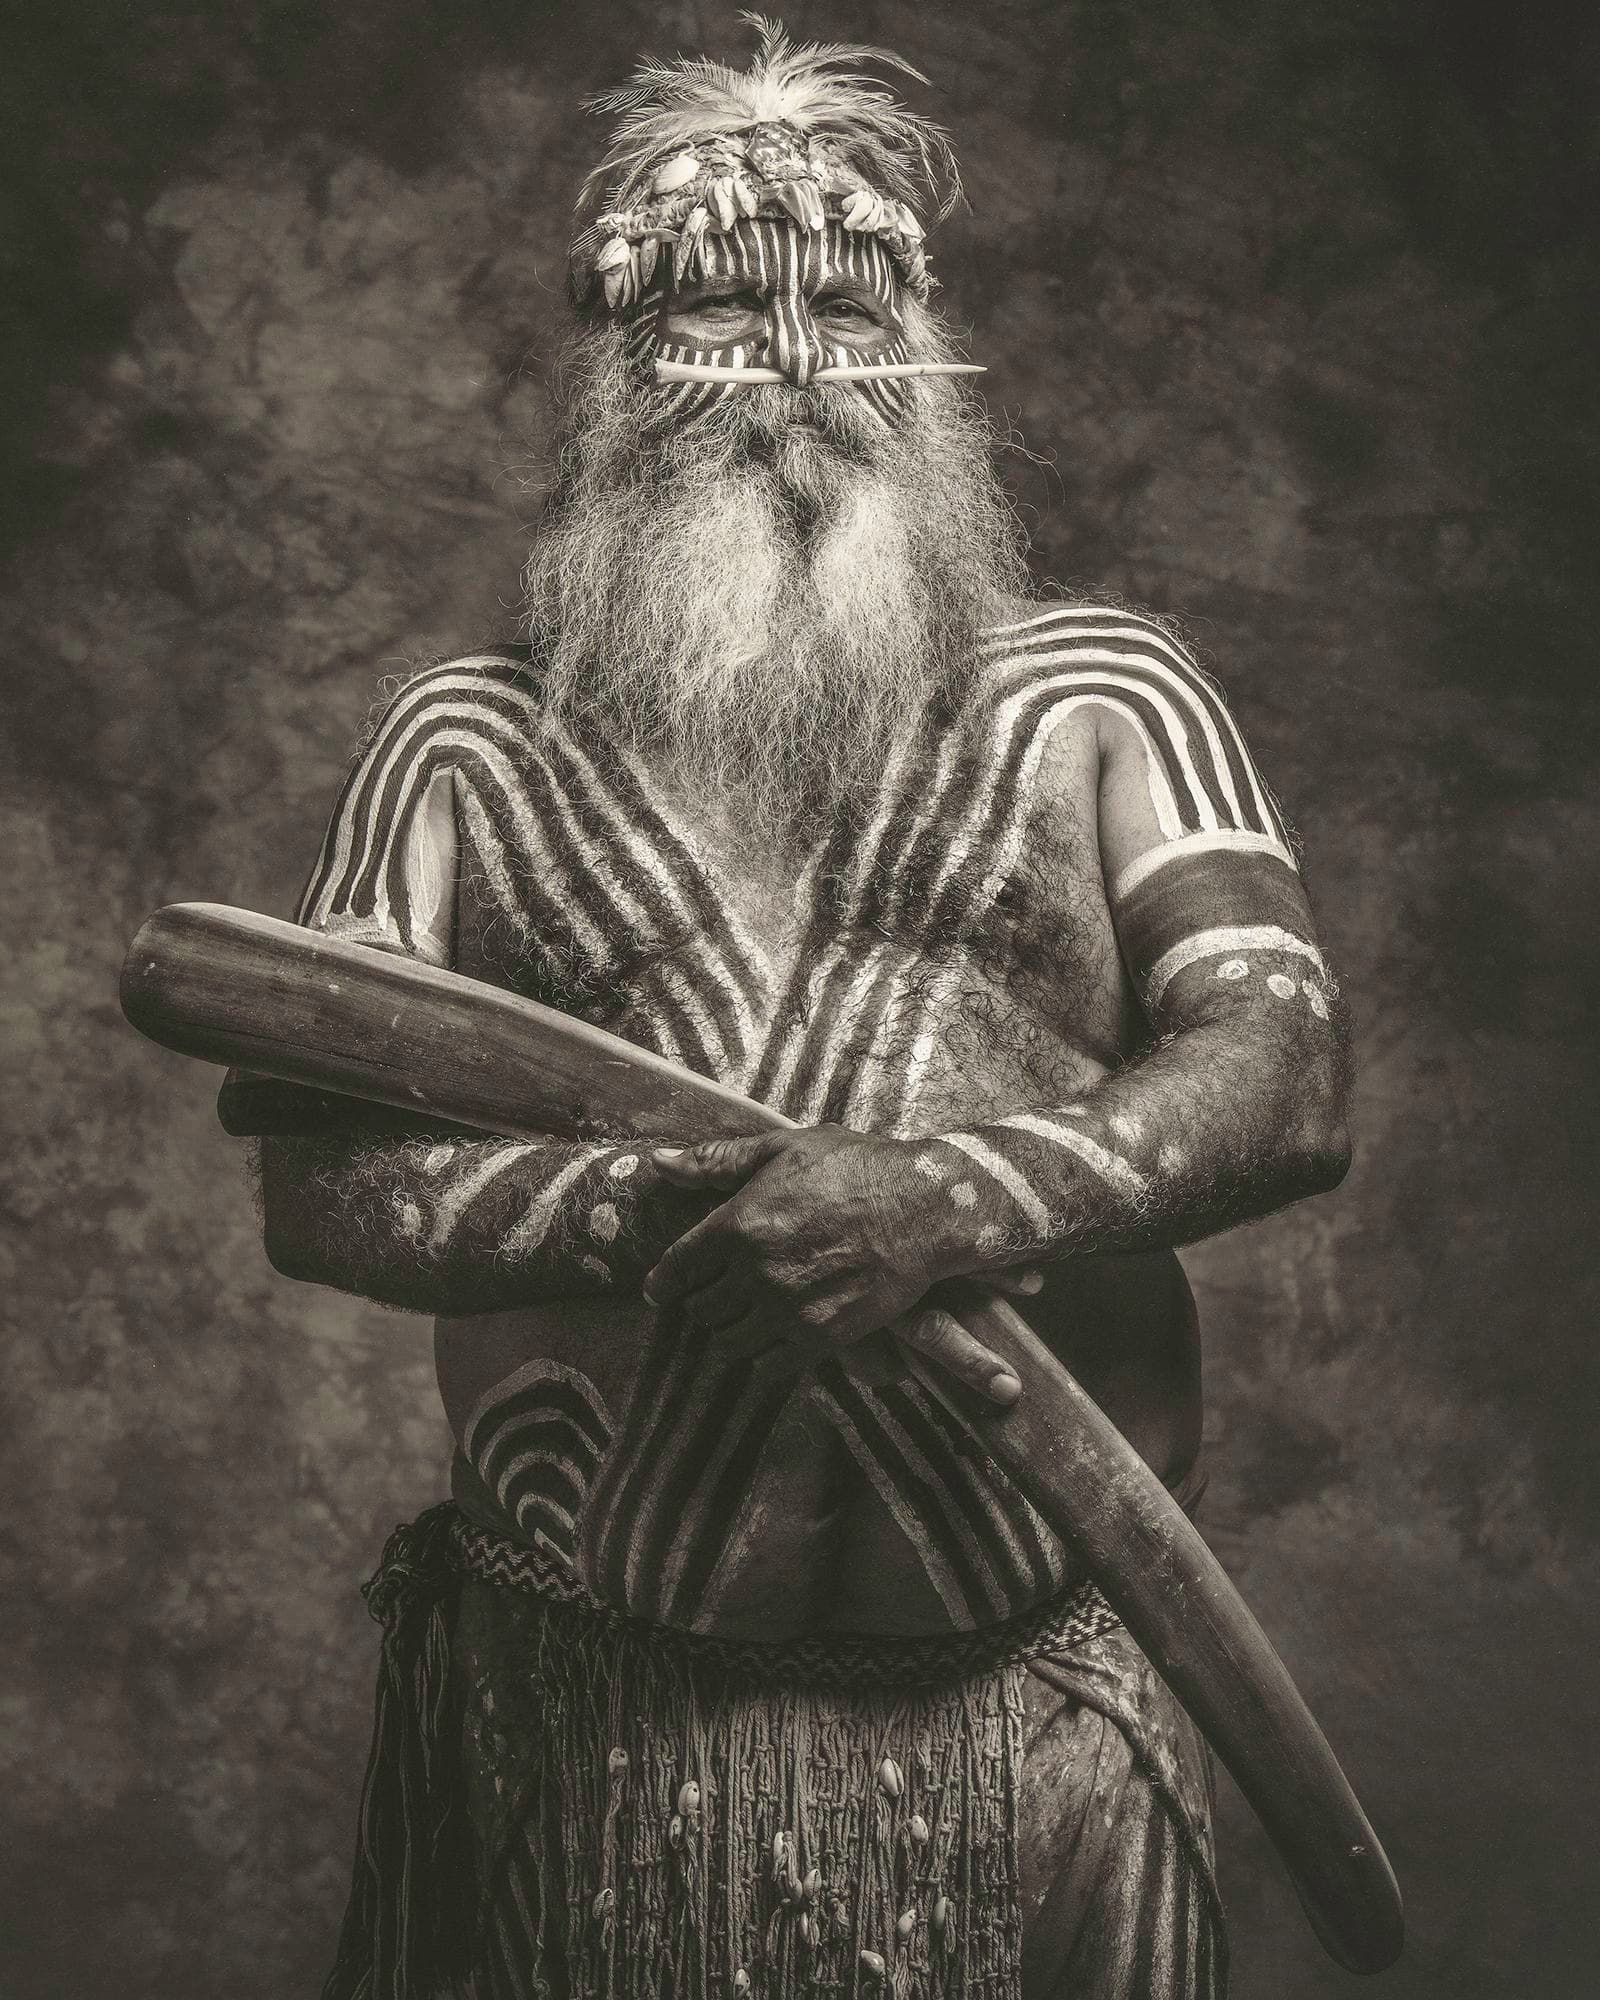 A black and white photograph of a man in body paint